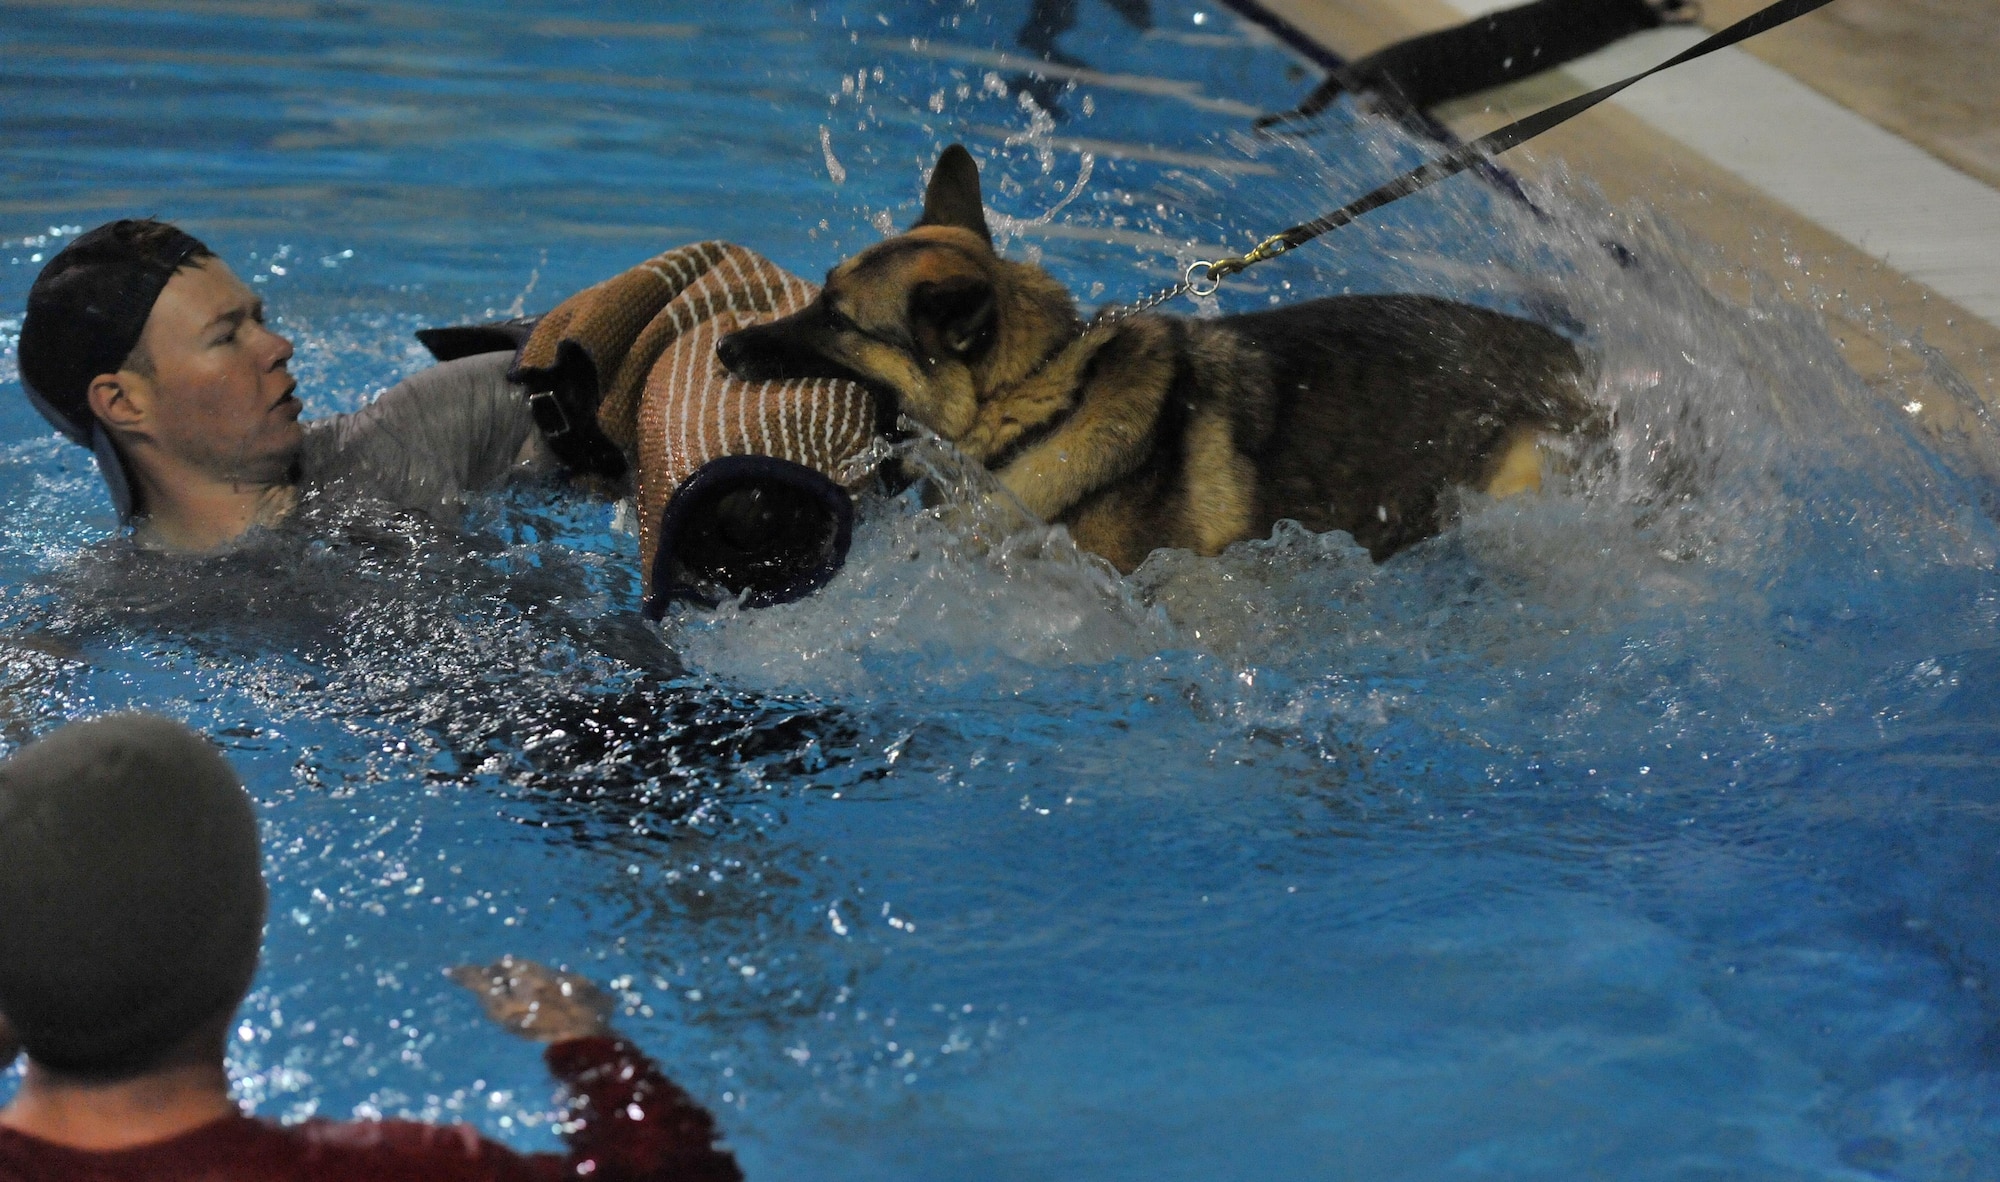 Satie, 380th Expeditionary Security Forces Squadron military working dog, age four, attacks a bite sleeve during annual water-based aggression training at the base pool at undisclosed location in Southwest Asia, Jan. 18, 2016. Bite sleeves are leathery training aids worn over the arm by agitators or trainers to protect themselves from injury during bite training with military working dogs. (U.S. Air Force photo by Staff Sgt. Kentavist P. Brackin/released)